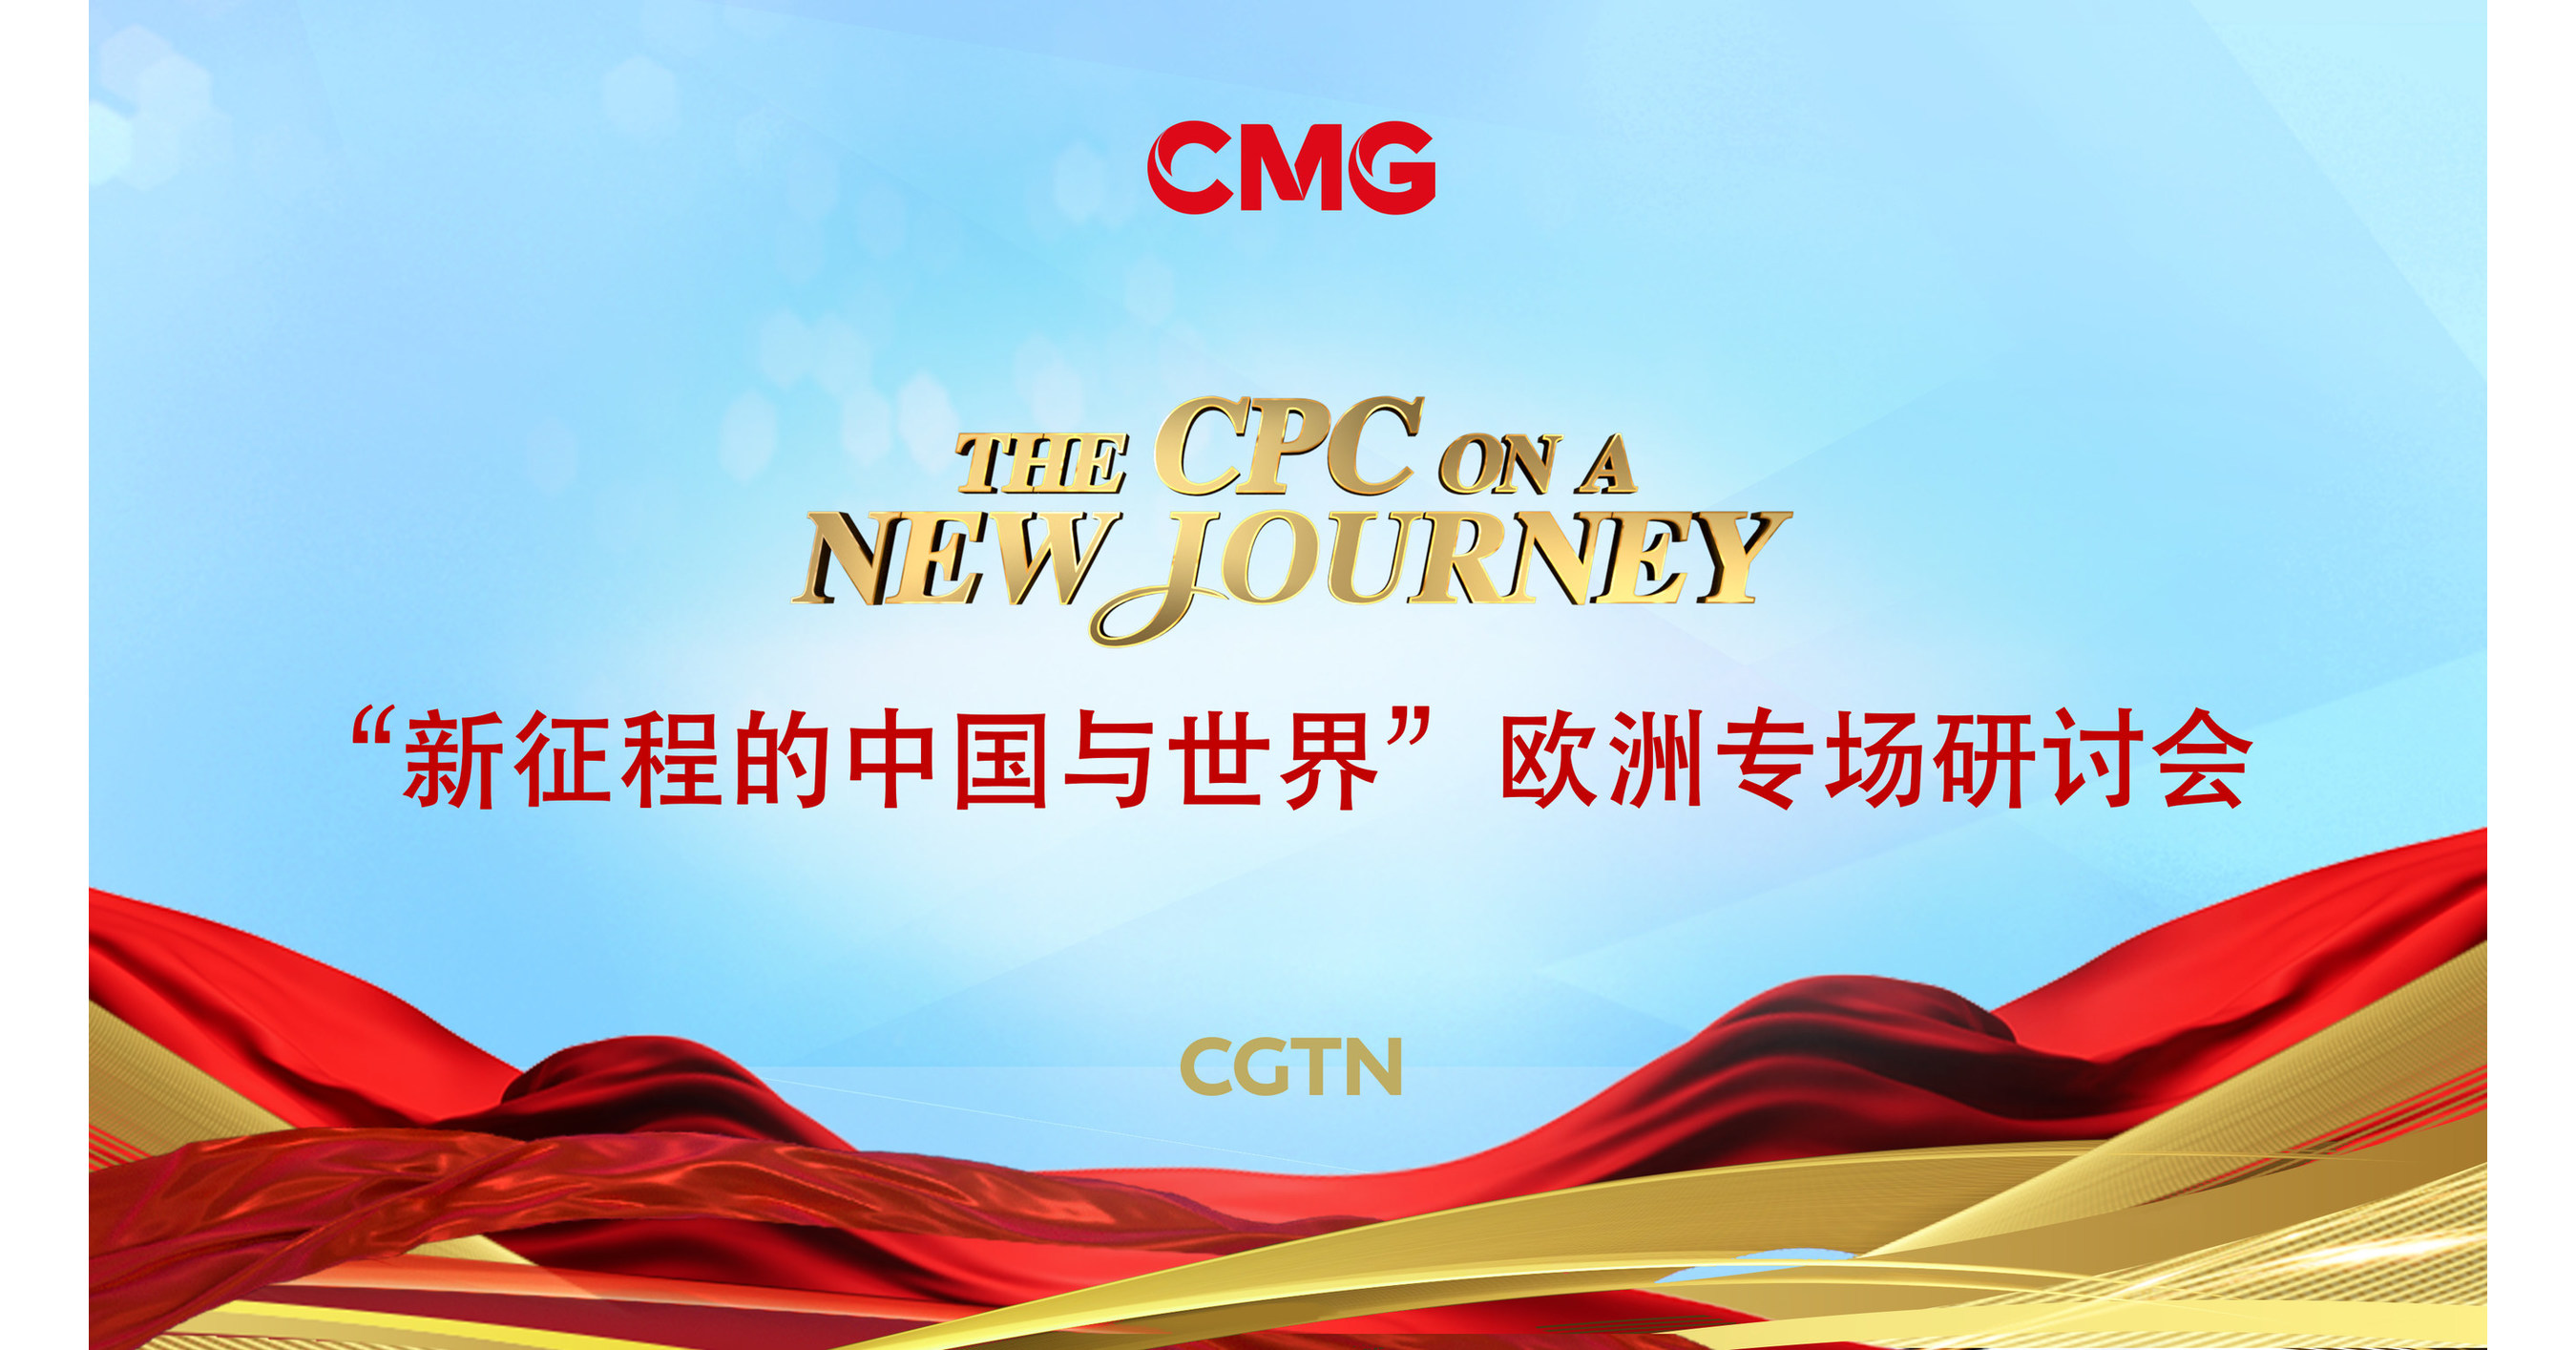 CMG Europe launches "A New Journey" - a special program to examine China's global relations